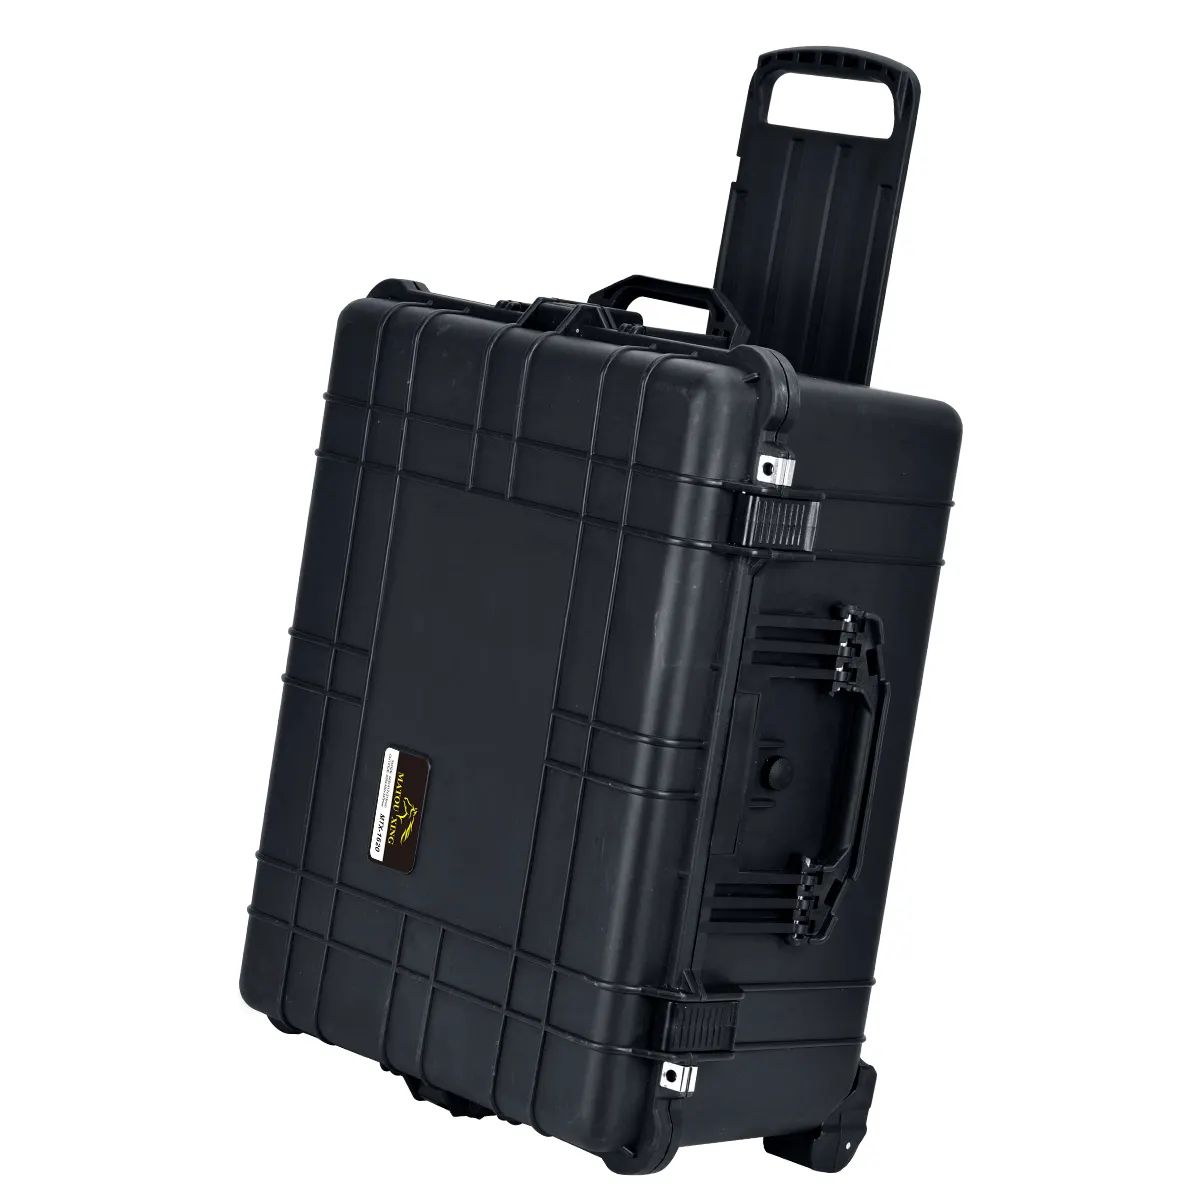 Portable Waterproof Protective Case Hard Camera Case box With Retractable Pull Handle And Rolling Wheels